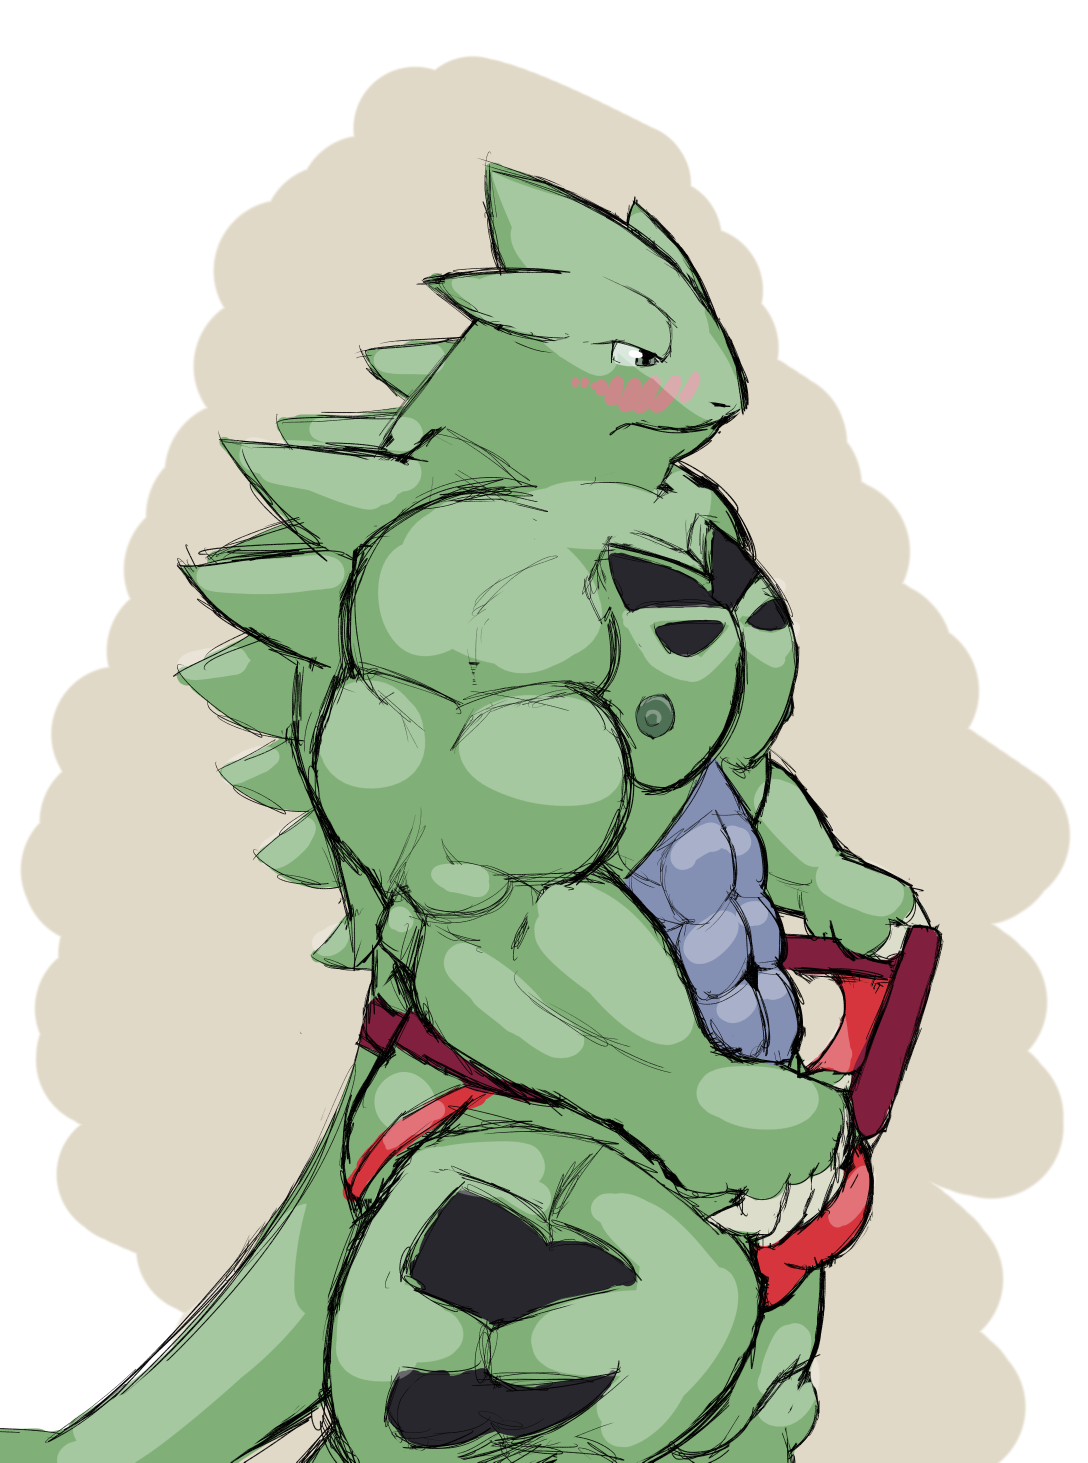 viridianvariant:  I got bored so here’s a buff ttar trying on undies. I don’t